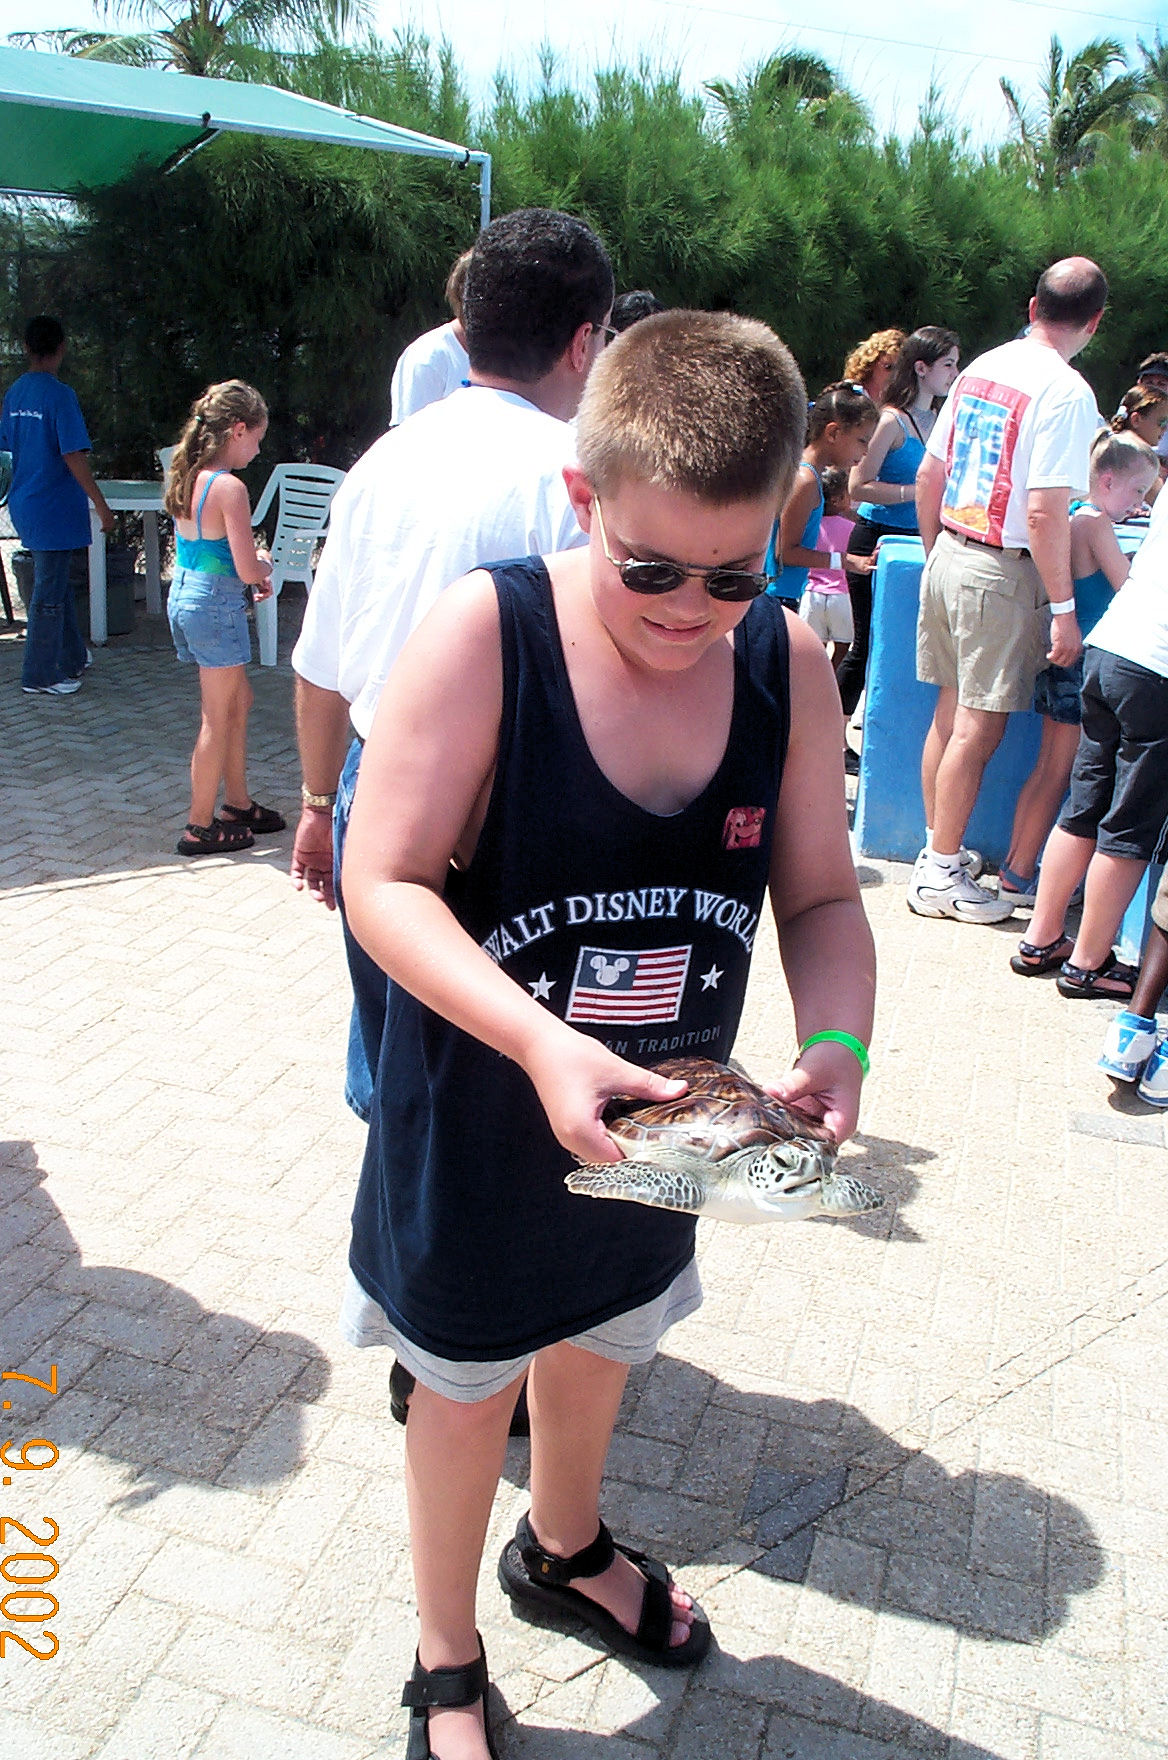 Me on Grand Cayman, one of the stops on the Disney Cruise Line, holding a turtle.